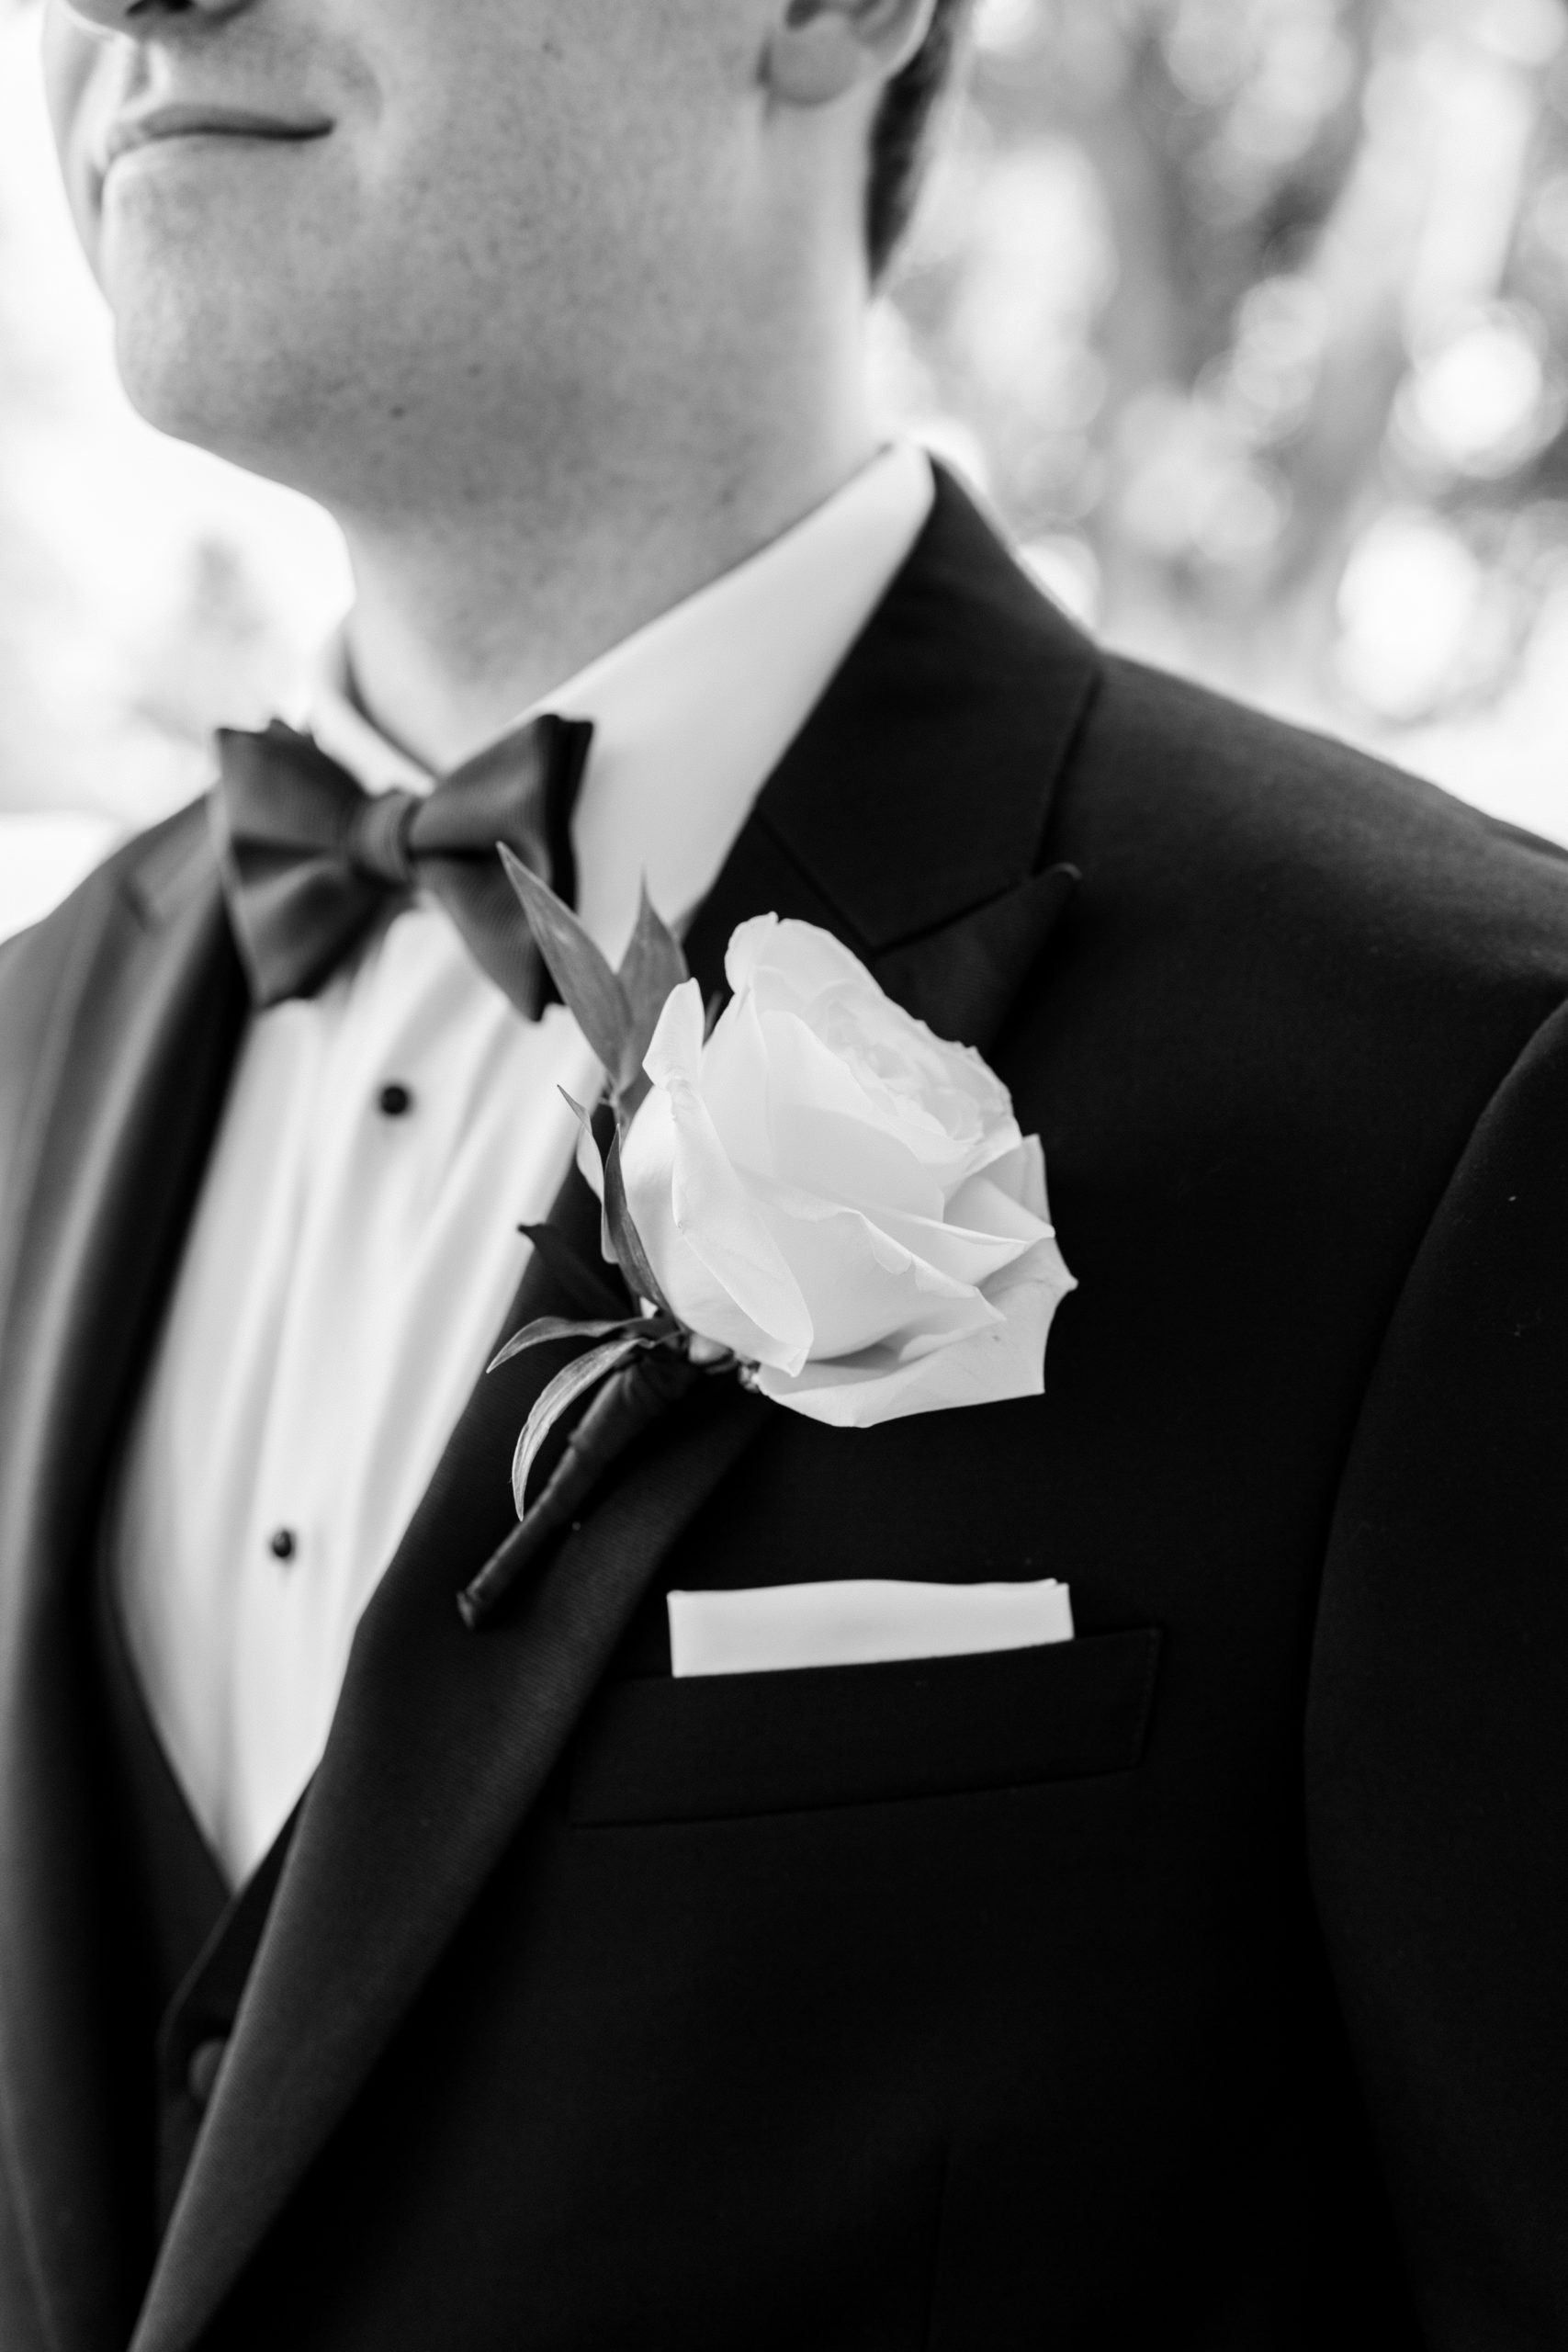 Up close view of groom's corsage and suit jacket in black and white 